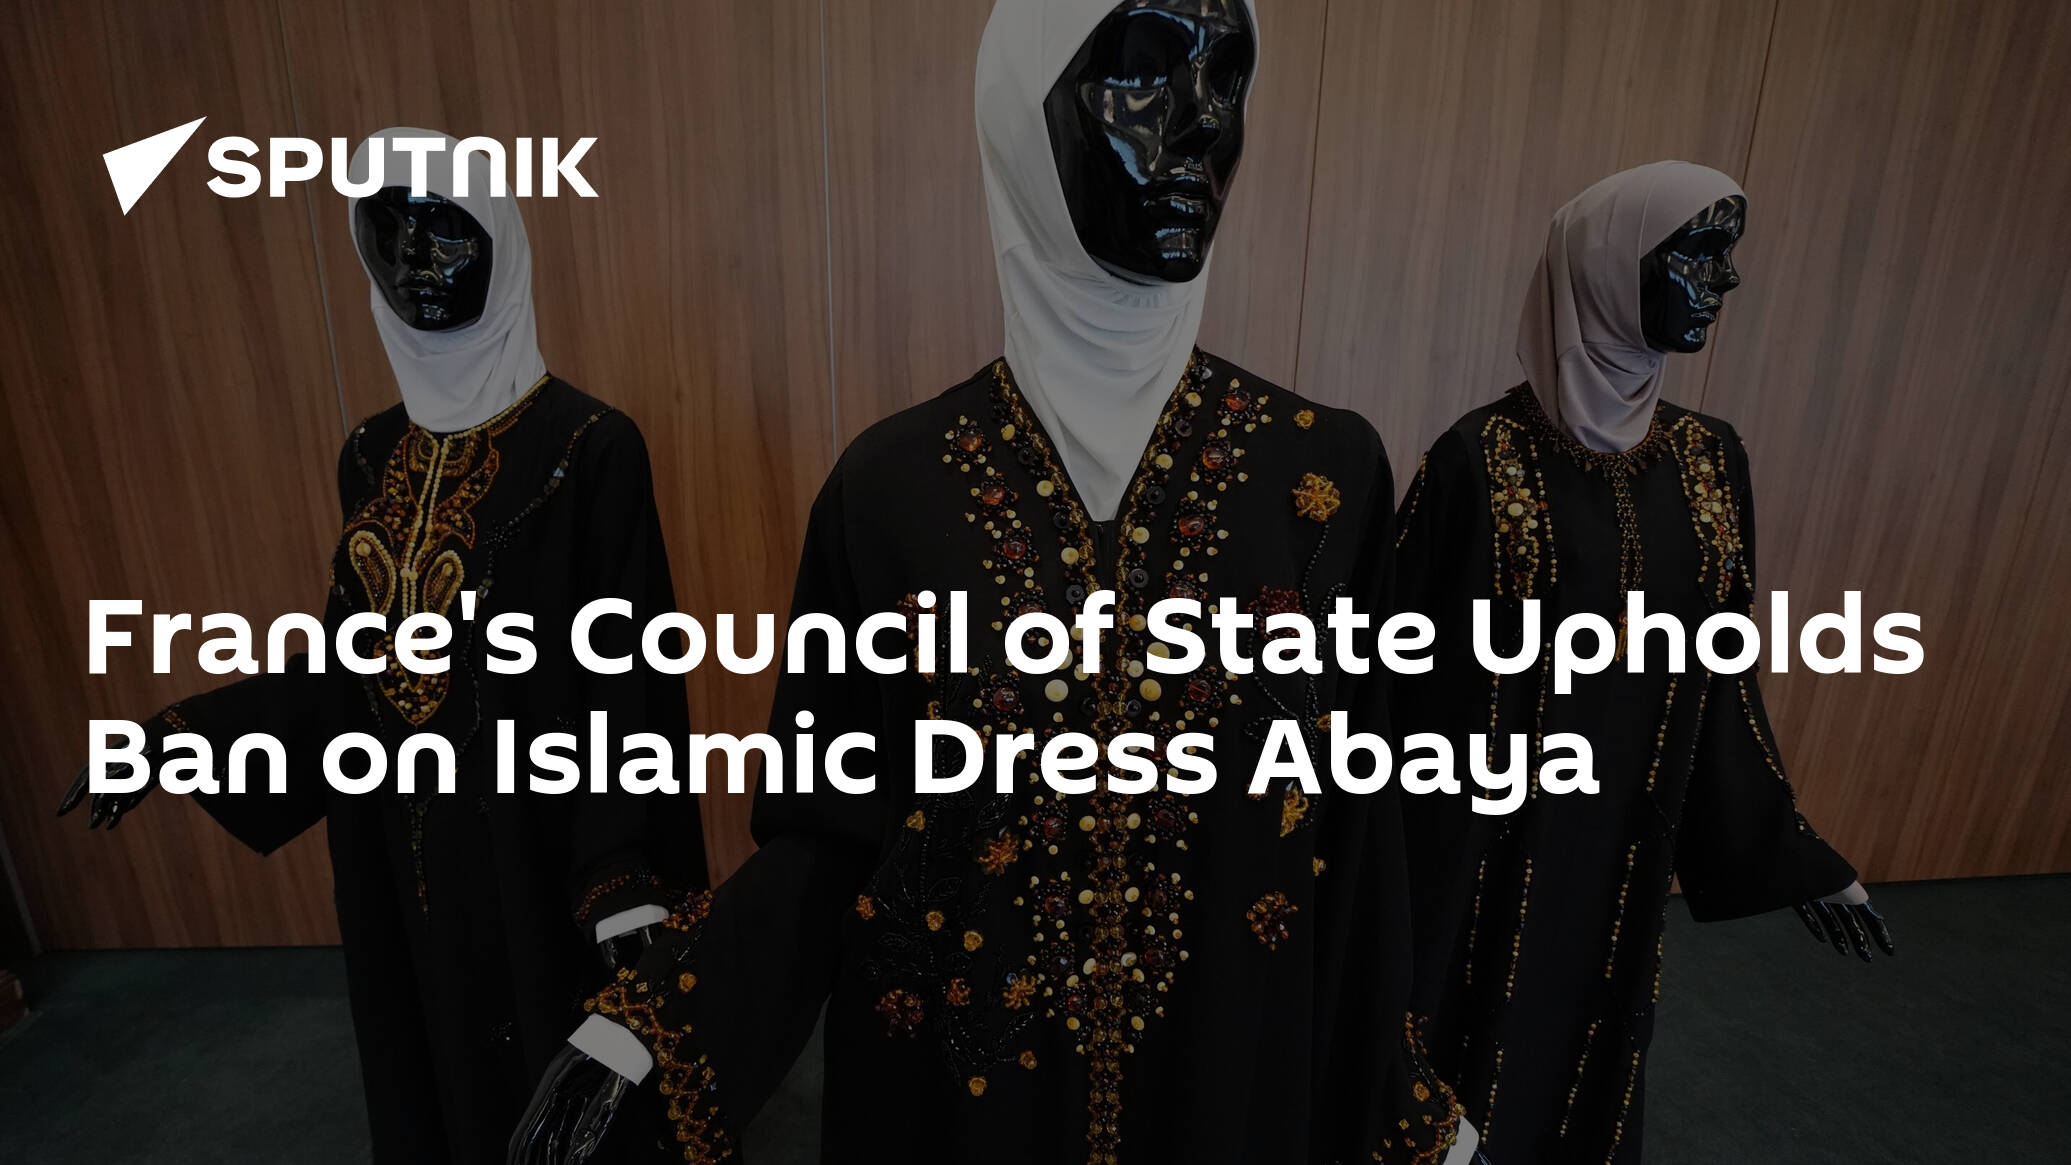 France's Council of State Upholds Ban on Islamic Dress Abaya